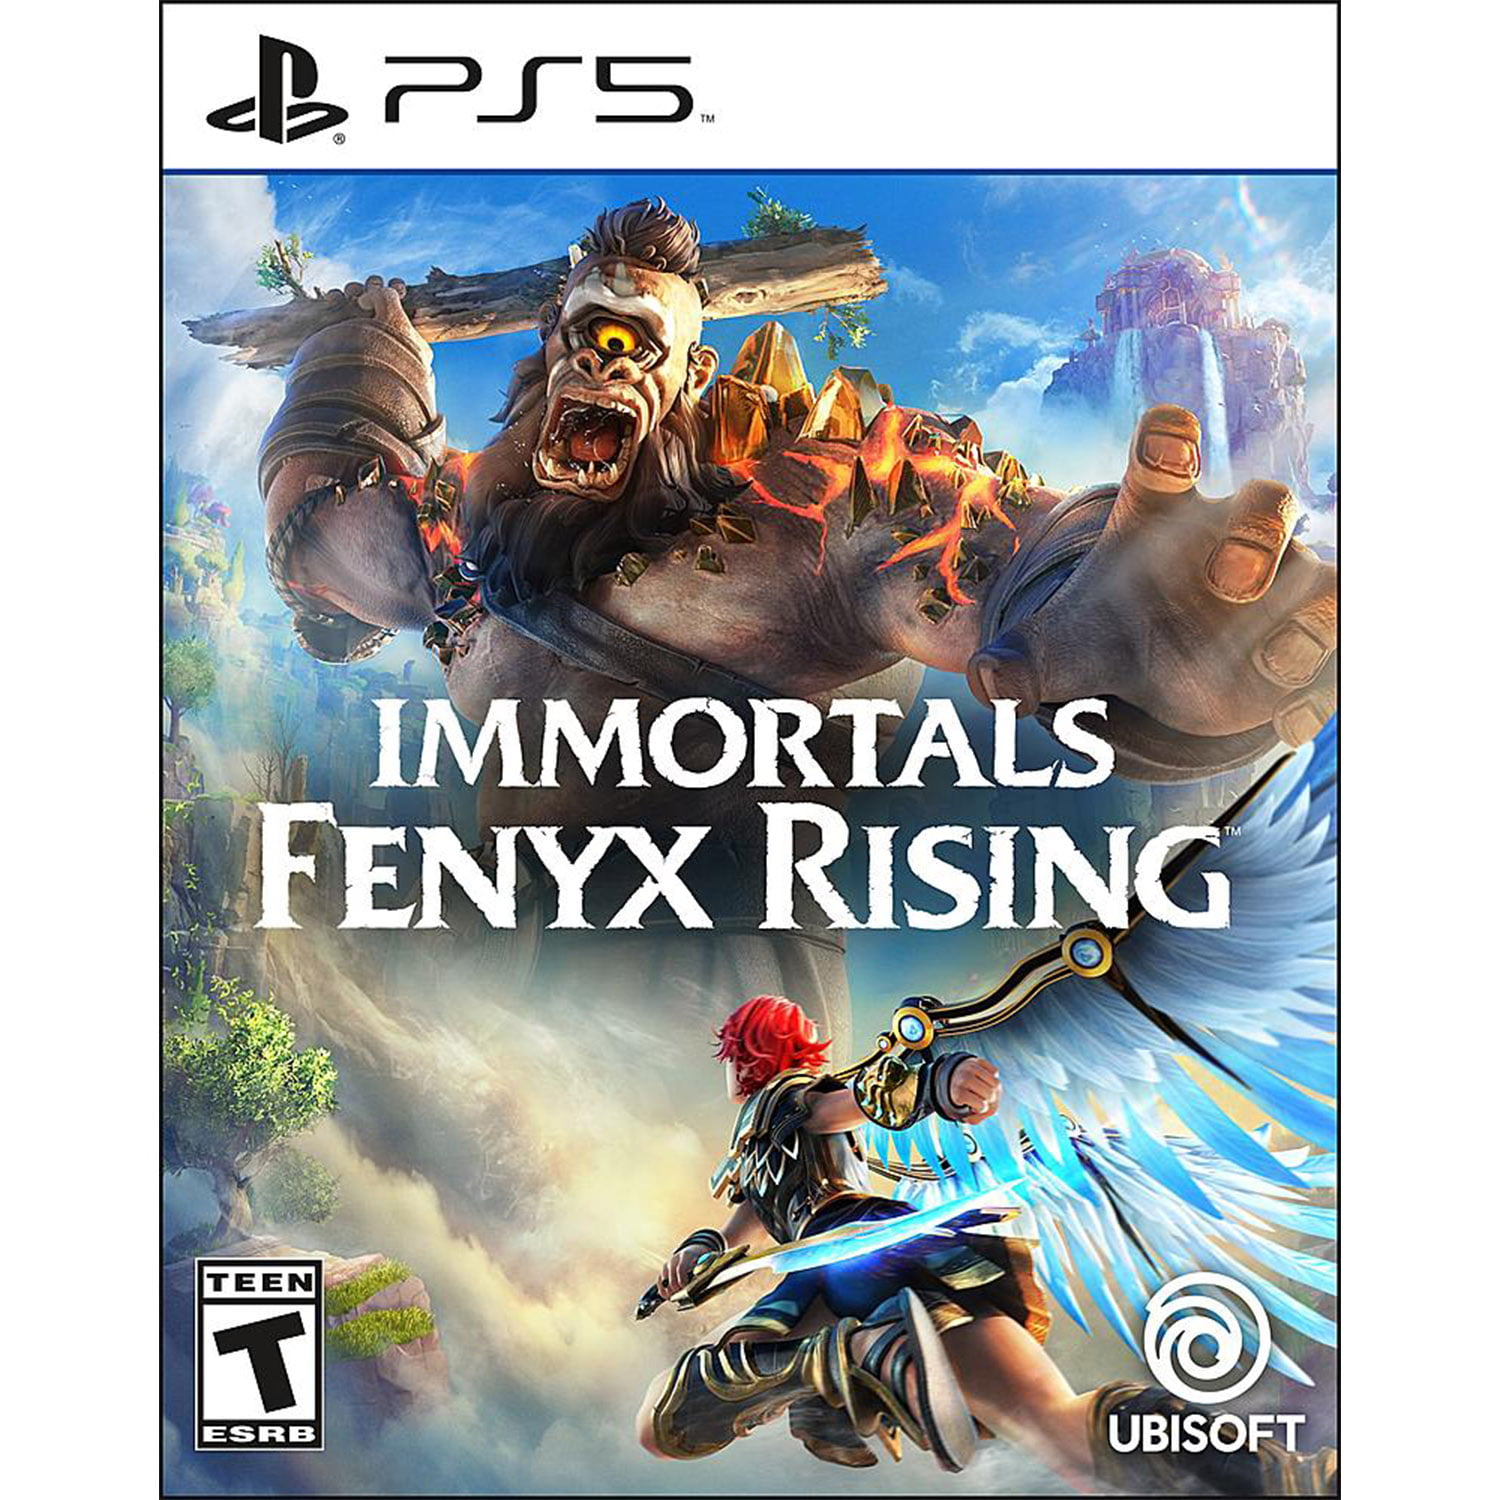 The Nioh Collection and Immortals Fenyx Rising - Two Games For PS5